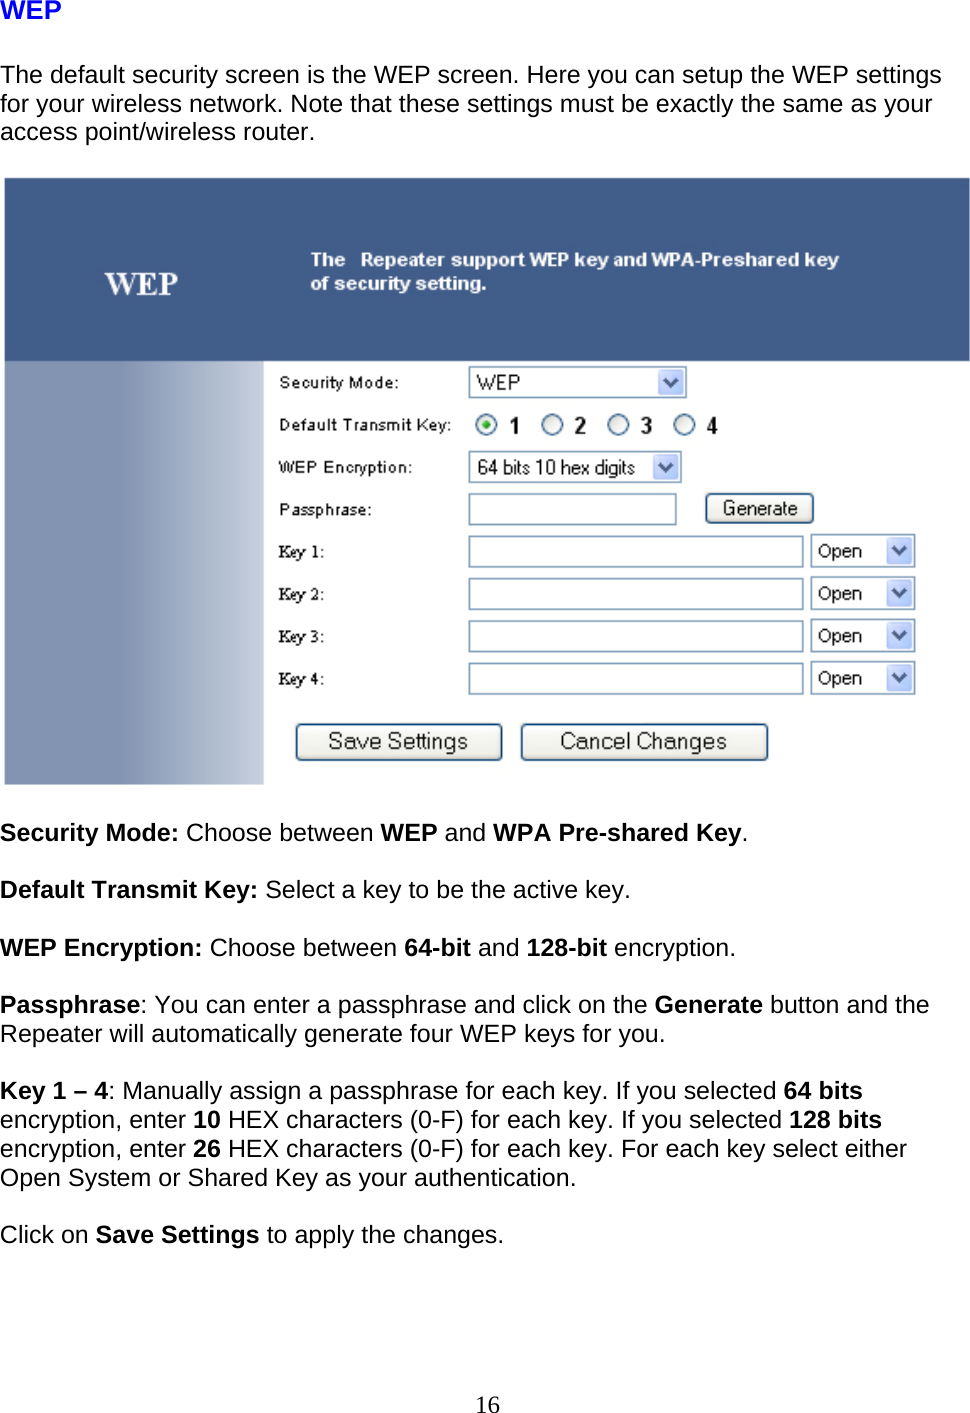 16 WEP  The default security screen is the WEP screen. Here you can setup the WEP settings for your wireless network. Note that these settings must be exactly the same as your access point/wireless router.    Security Mode: Choose between WEP and WPA Pre-shared Key.  Default Transmit Key: Select a key to be the active key.  WEP Encryption: Choose between 64-bit and 128-bit encryption.  Passphrase: You can enter a passphrase and click on the Generate button and the Repeater will automatically generate four WEP keys for you.  Key 1 – 4: Manually assign a passphrase for each key. If you selected 64 bits encryption, enter 10 HEX characters (0-F) for each key. If you selected 128 bits encryption, enter 26 HEX characters (0-F) for each key. For each key select either Open System or Shared Key as your authentication.  Click on Save Settings to apply the changes.    